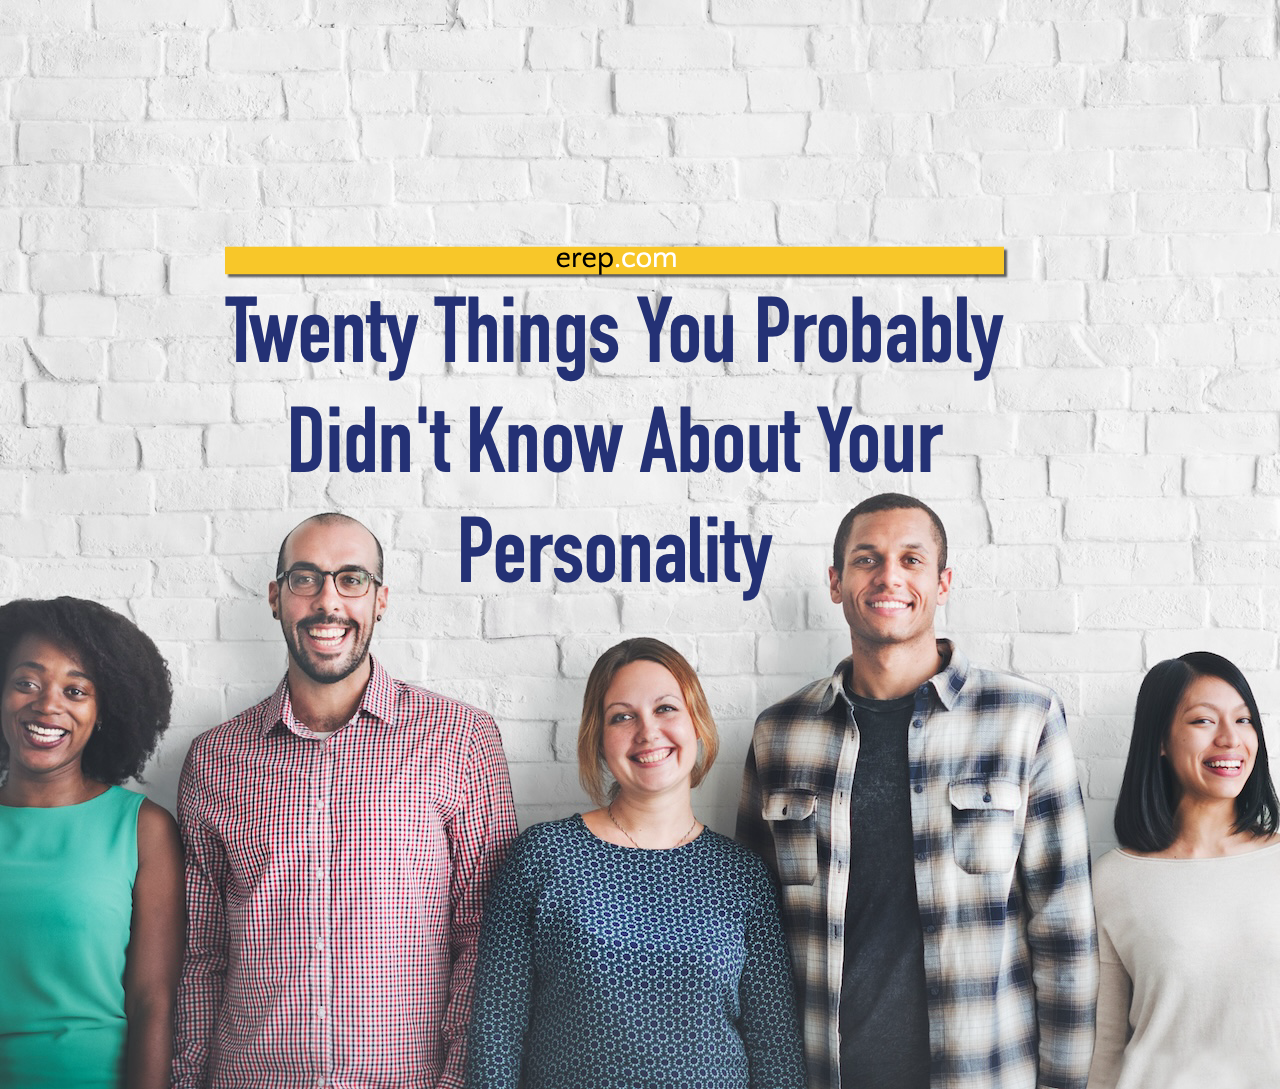 Twenty Things You Probably Didn't Know About Your Personality